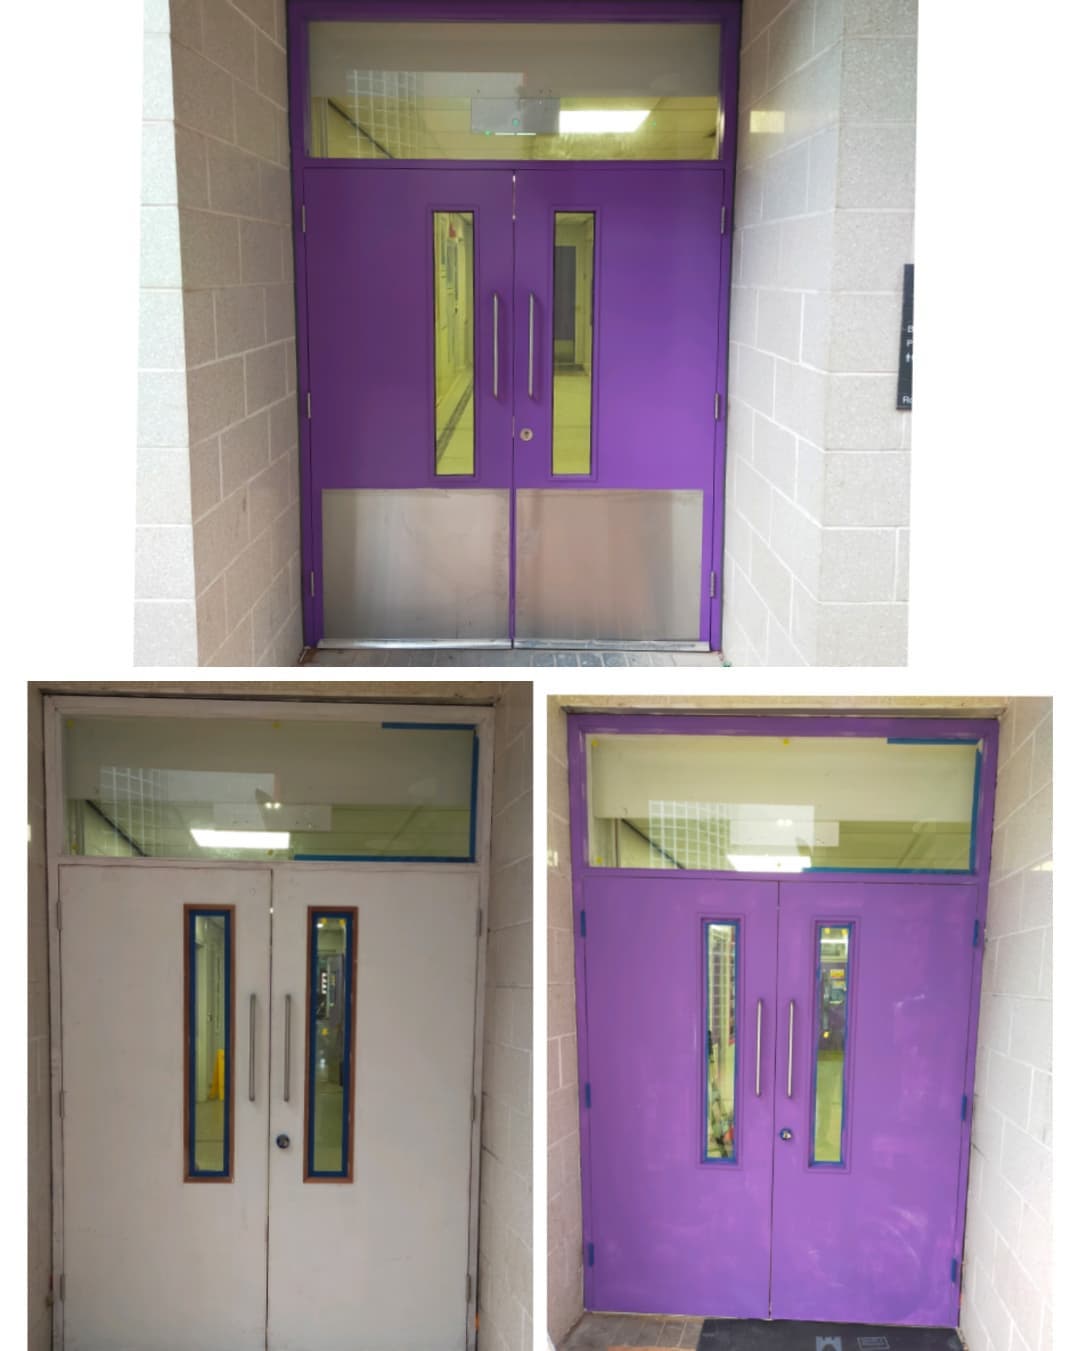 Painting and decorating in birmingham.
Just a little selection of doors we have …